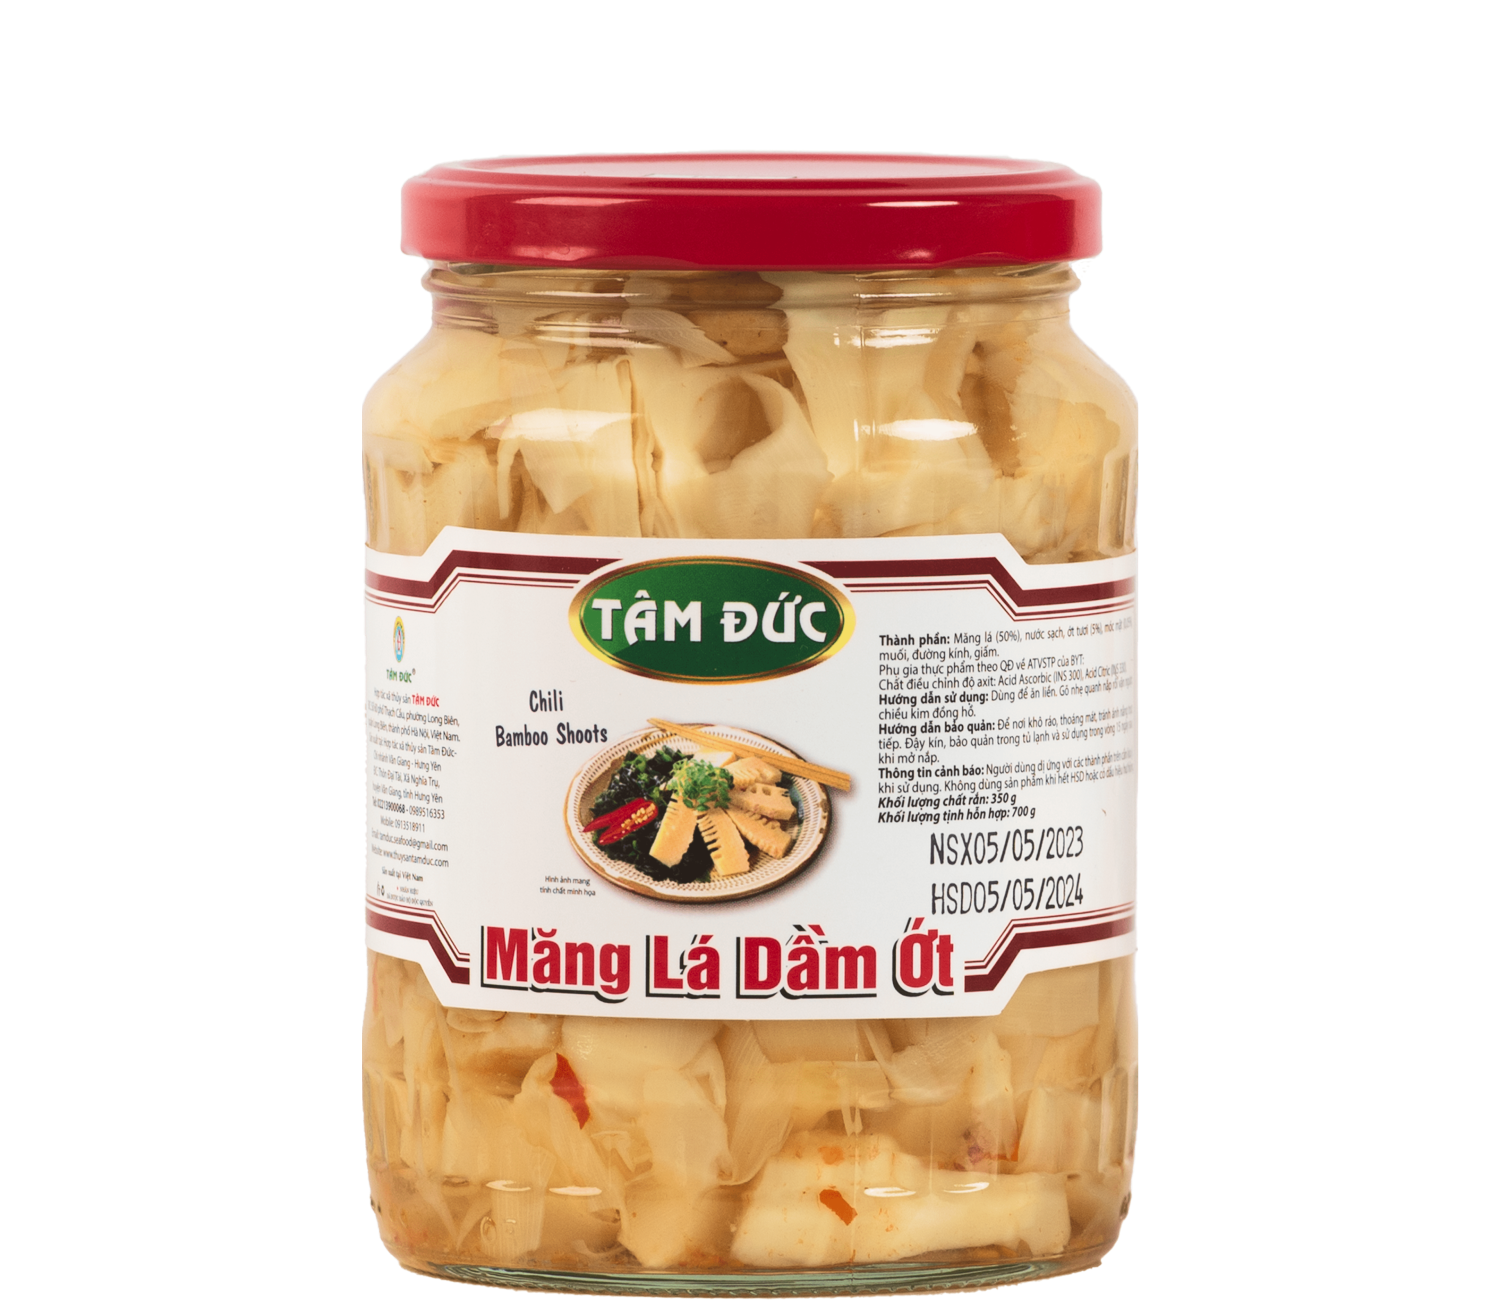 Bamboo shoots pickled with chili